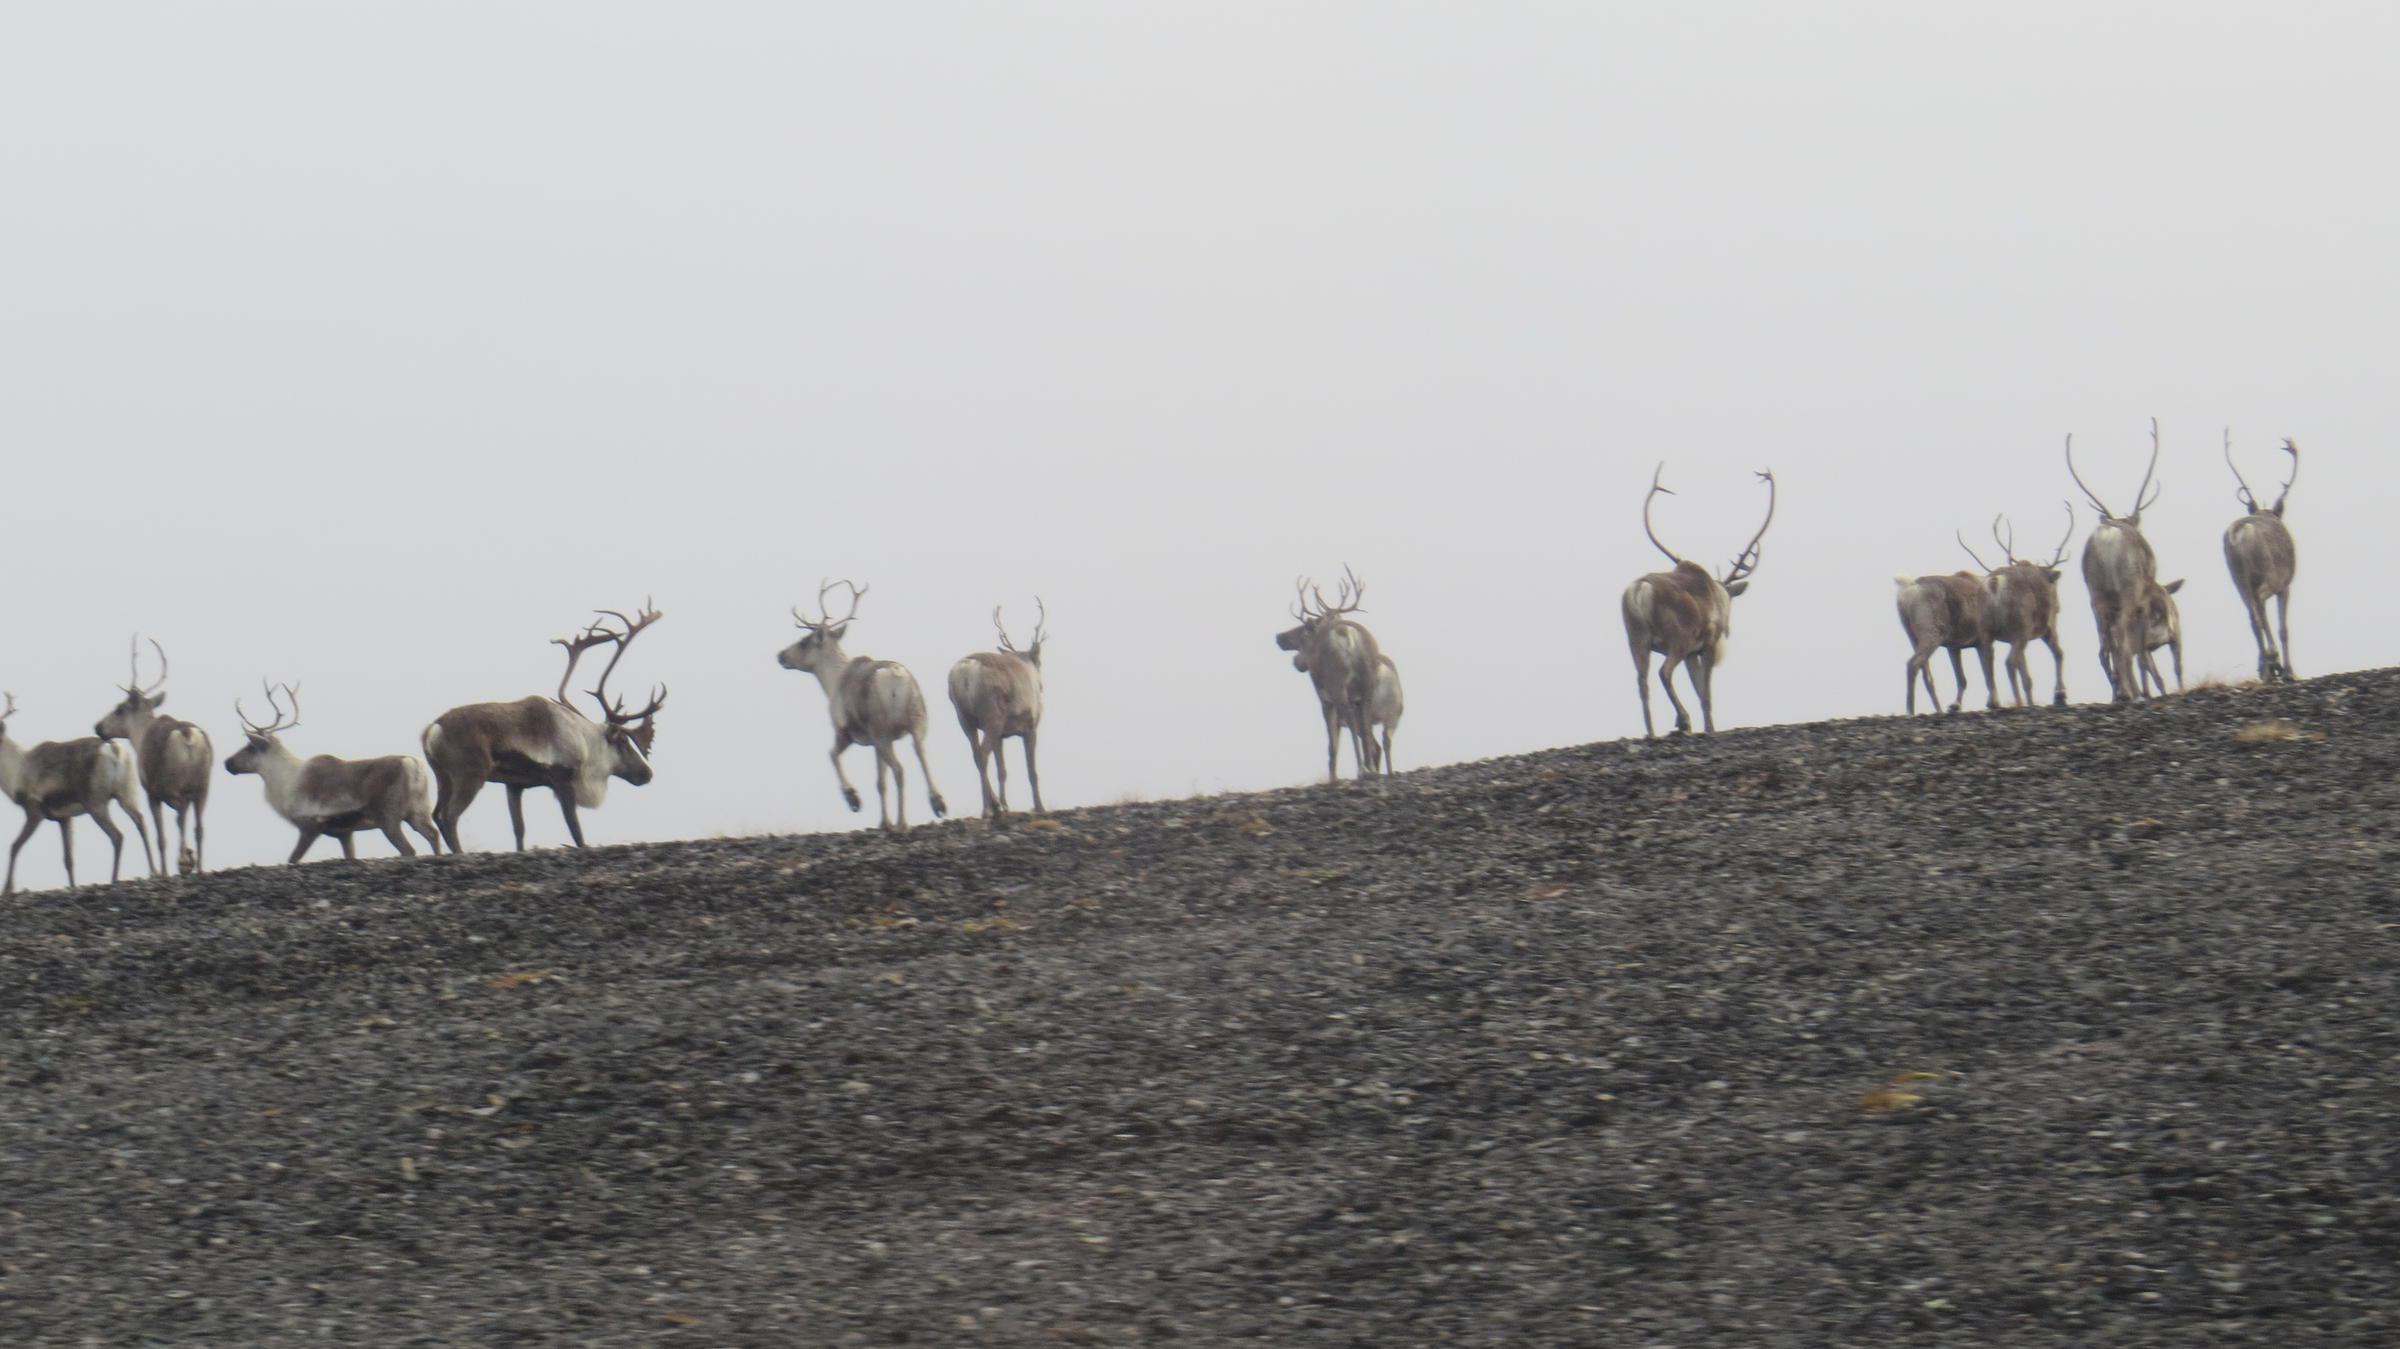 There are caribou along the Denali Highway, but don't count on